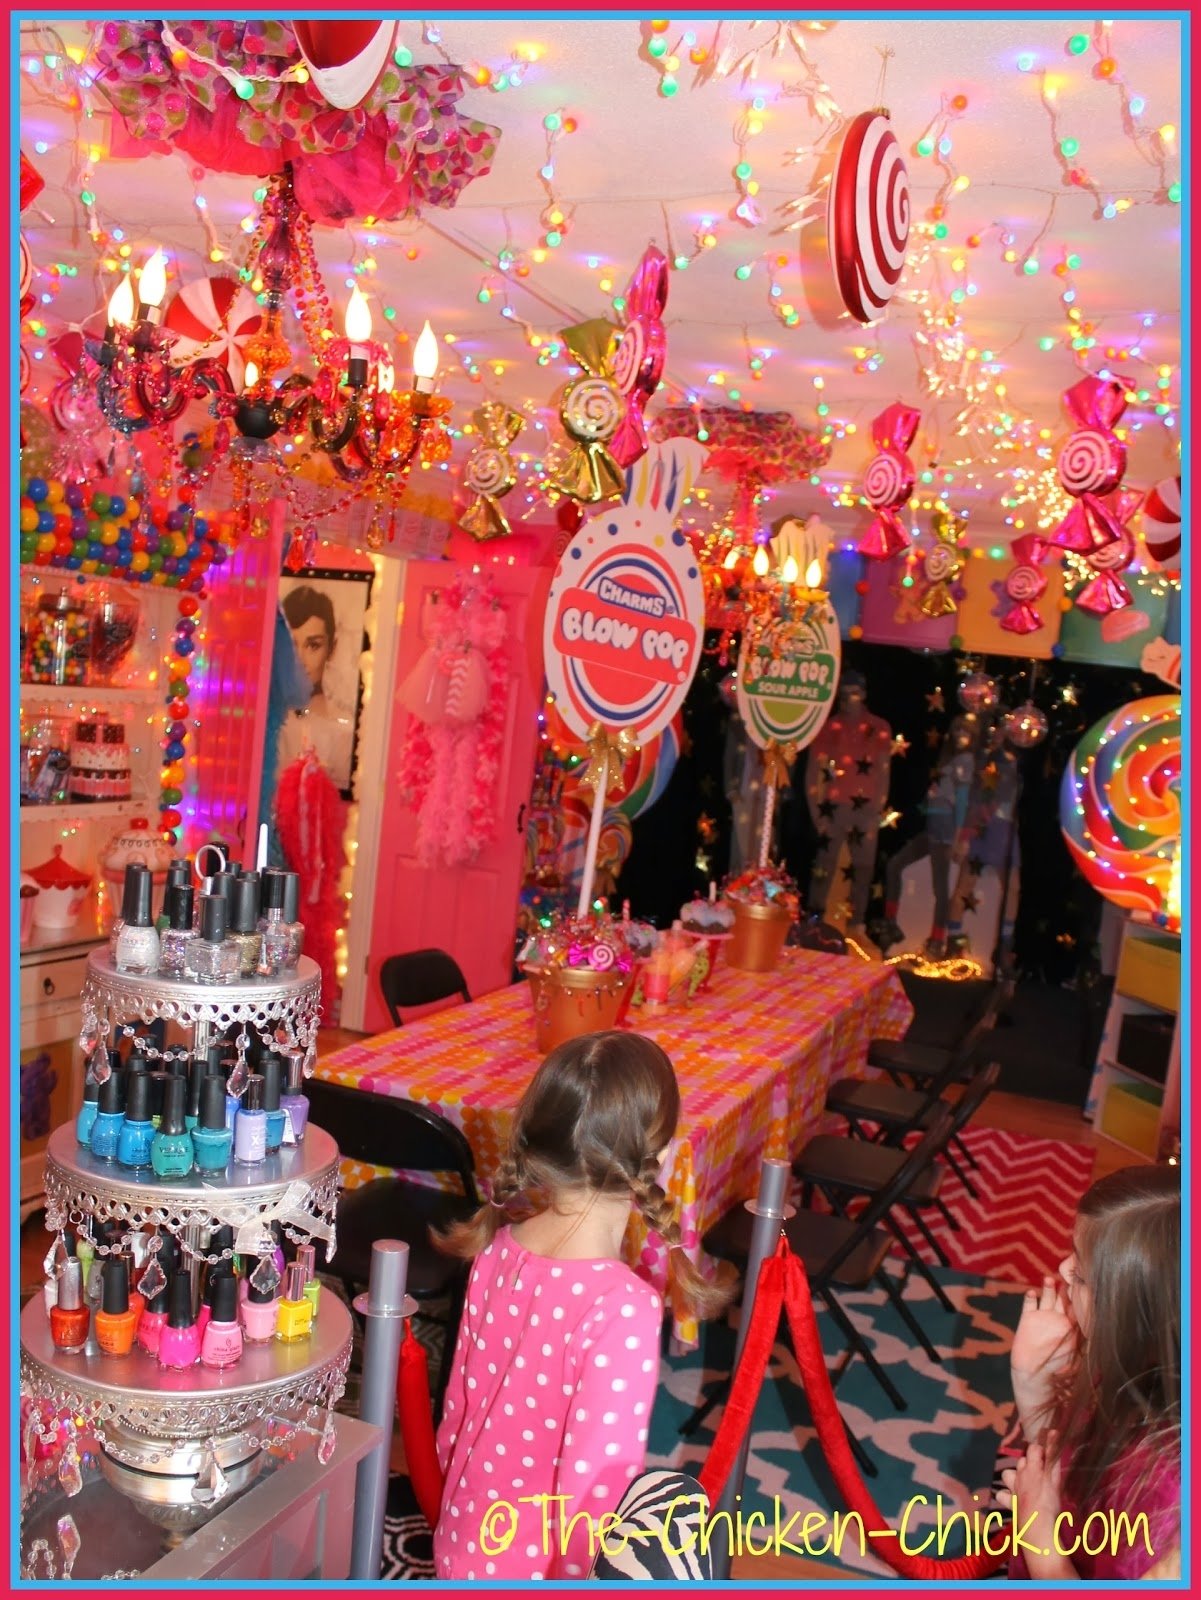 10 Spectacular Birthday Party Ideas For 10 Year Old Girl spa birthday party ideas for 7 year olds pool design ideas 2 2022